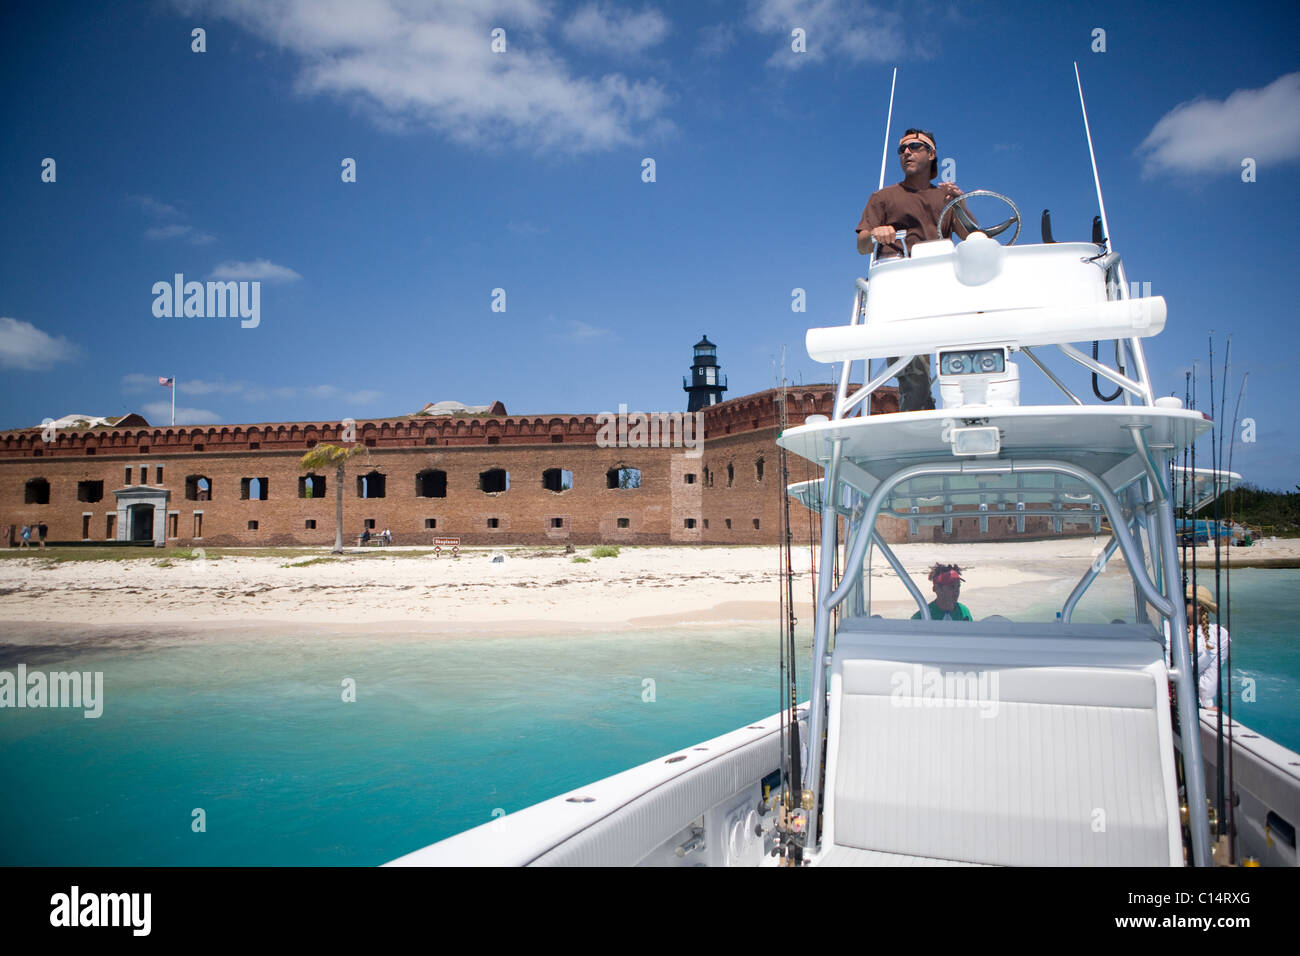 A fisherman steers his boat from the fly bridge pulling away from an old fortress with a lighthouse. Stock Photo